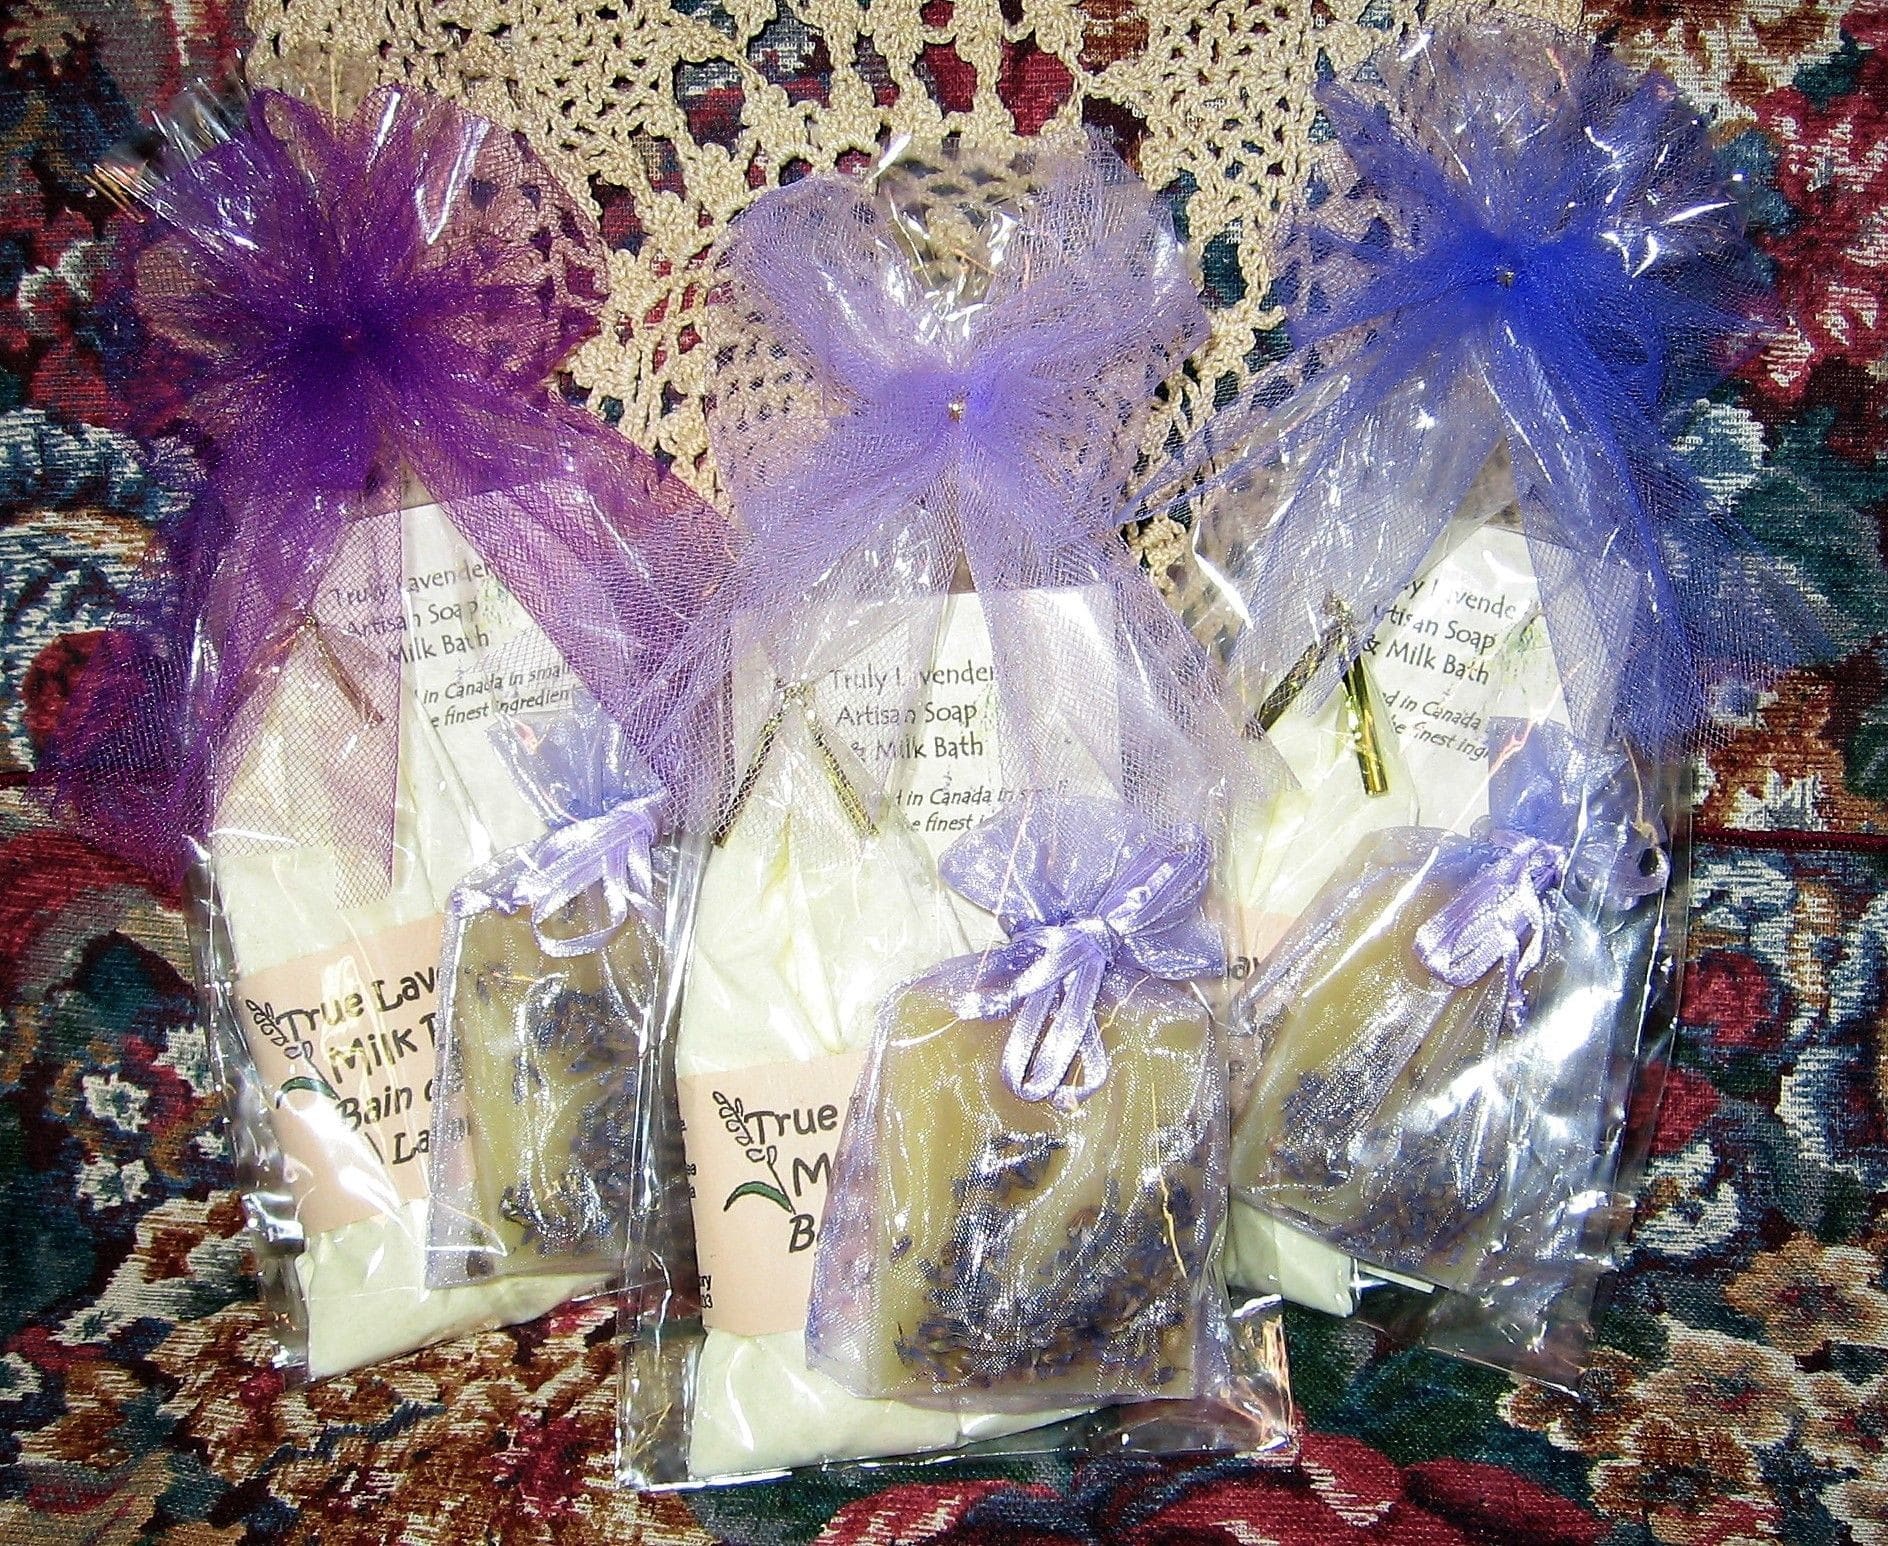 We welcome your inquiries for custom orders for soap favours or gift collections for your Wedding Day or bridesmaid gifts. Reasonable pricing, generous discount